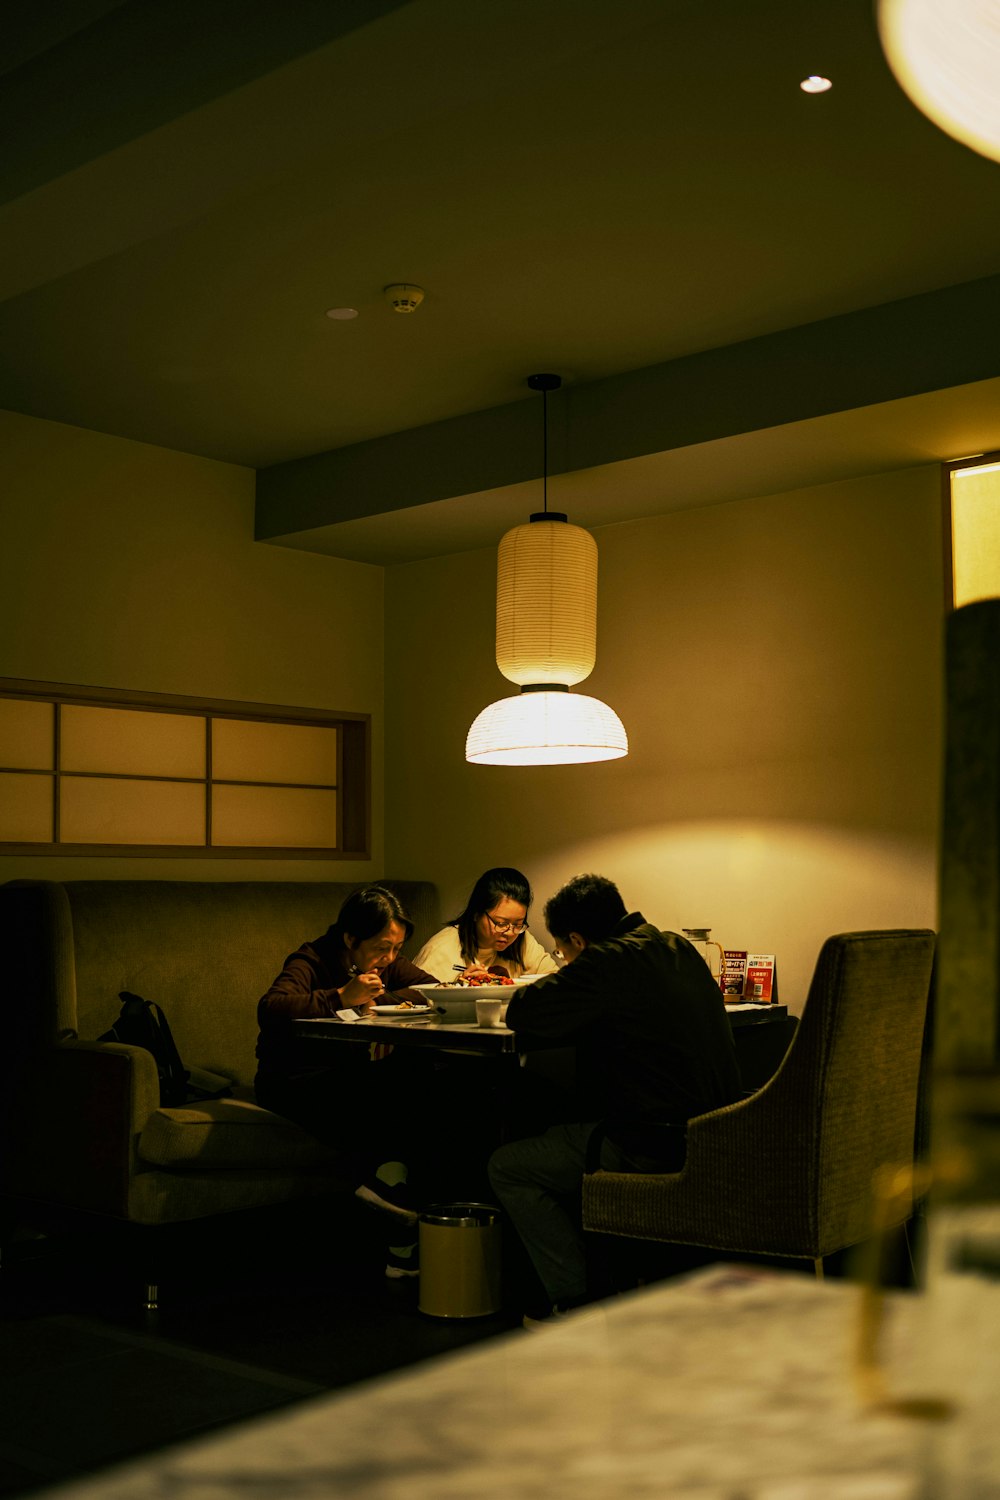 three people sitting at a table in a dimly lit room